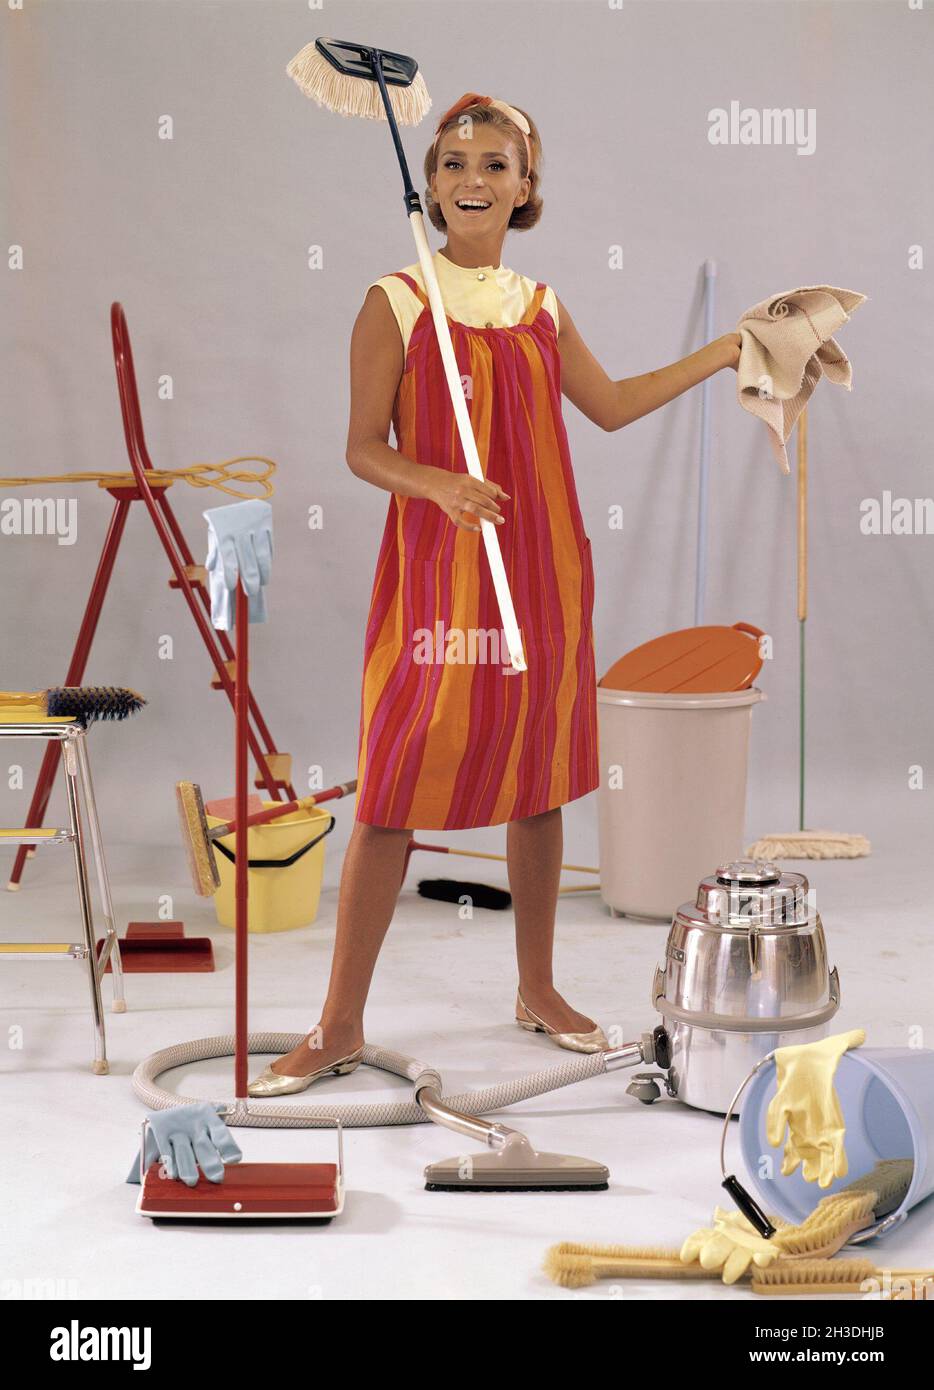 Cleaning day in the 1960s. A young woman is pictured with mops, vacuum-cleaner, buckets, cloths. Things and objects typically used in the 1960s when cleaning the house. Stock Photo